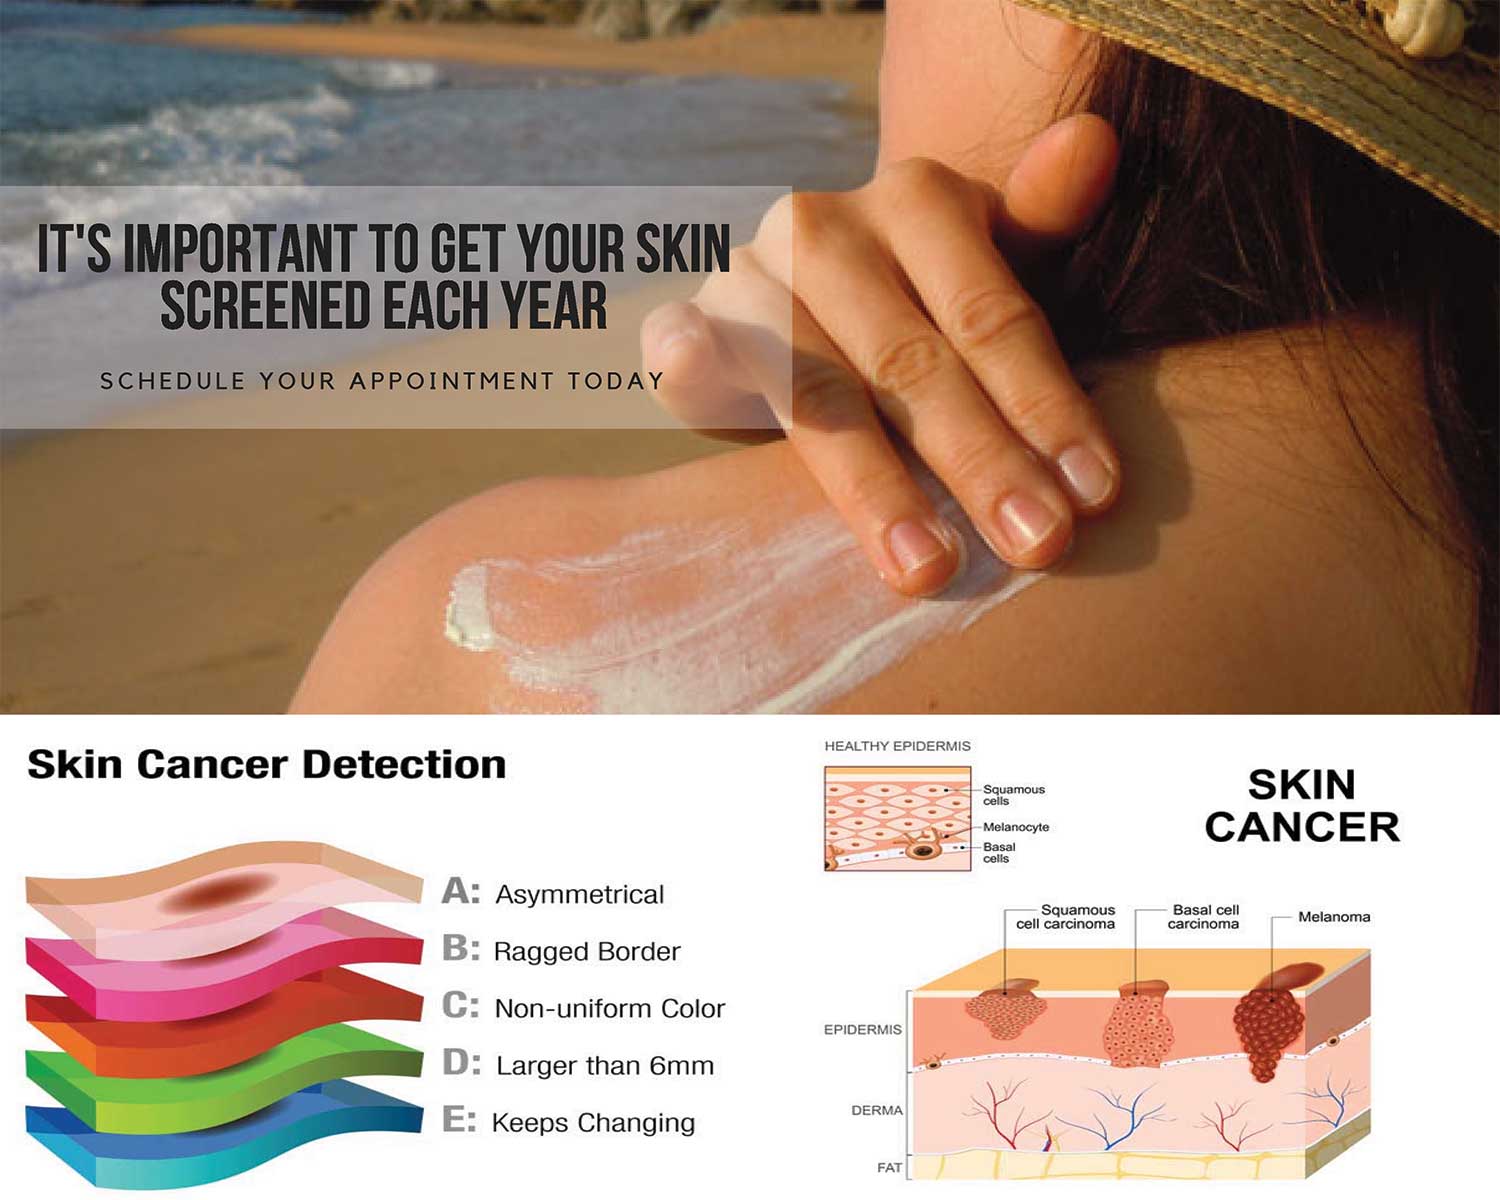 Skin Cancer and Steps You Can Take to Prevent It